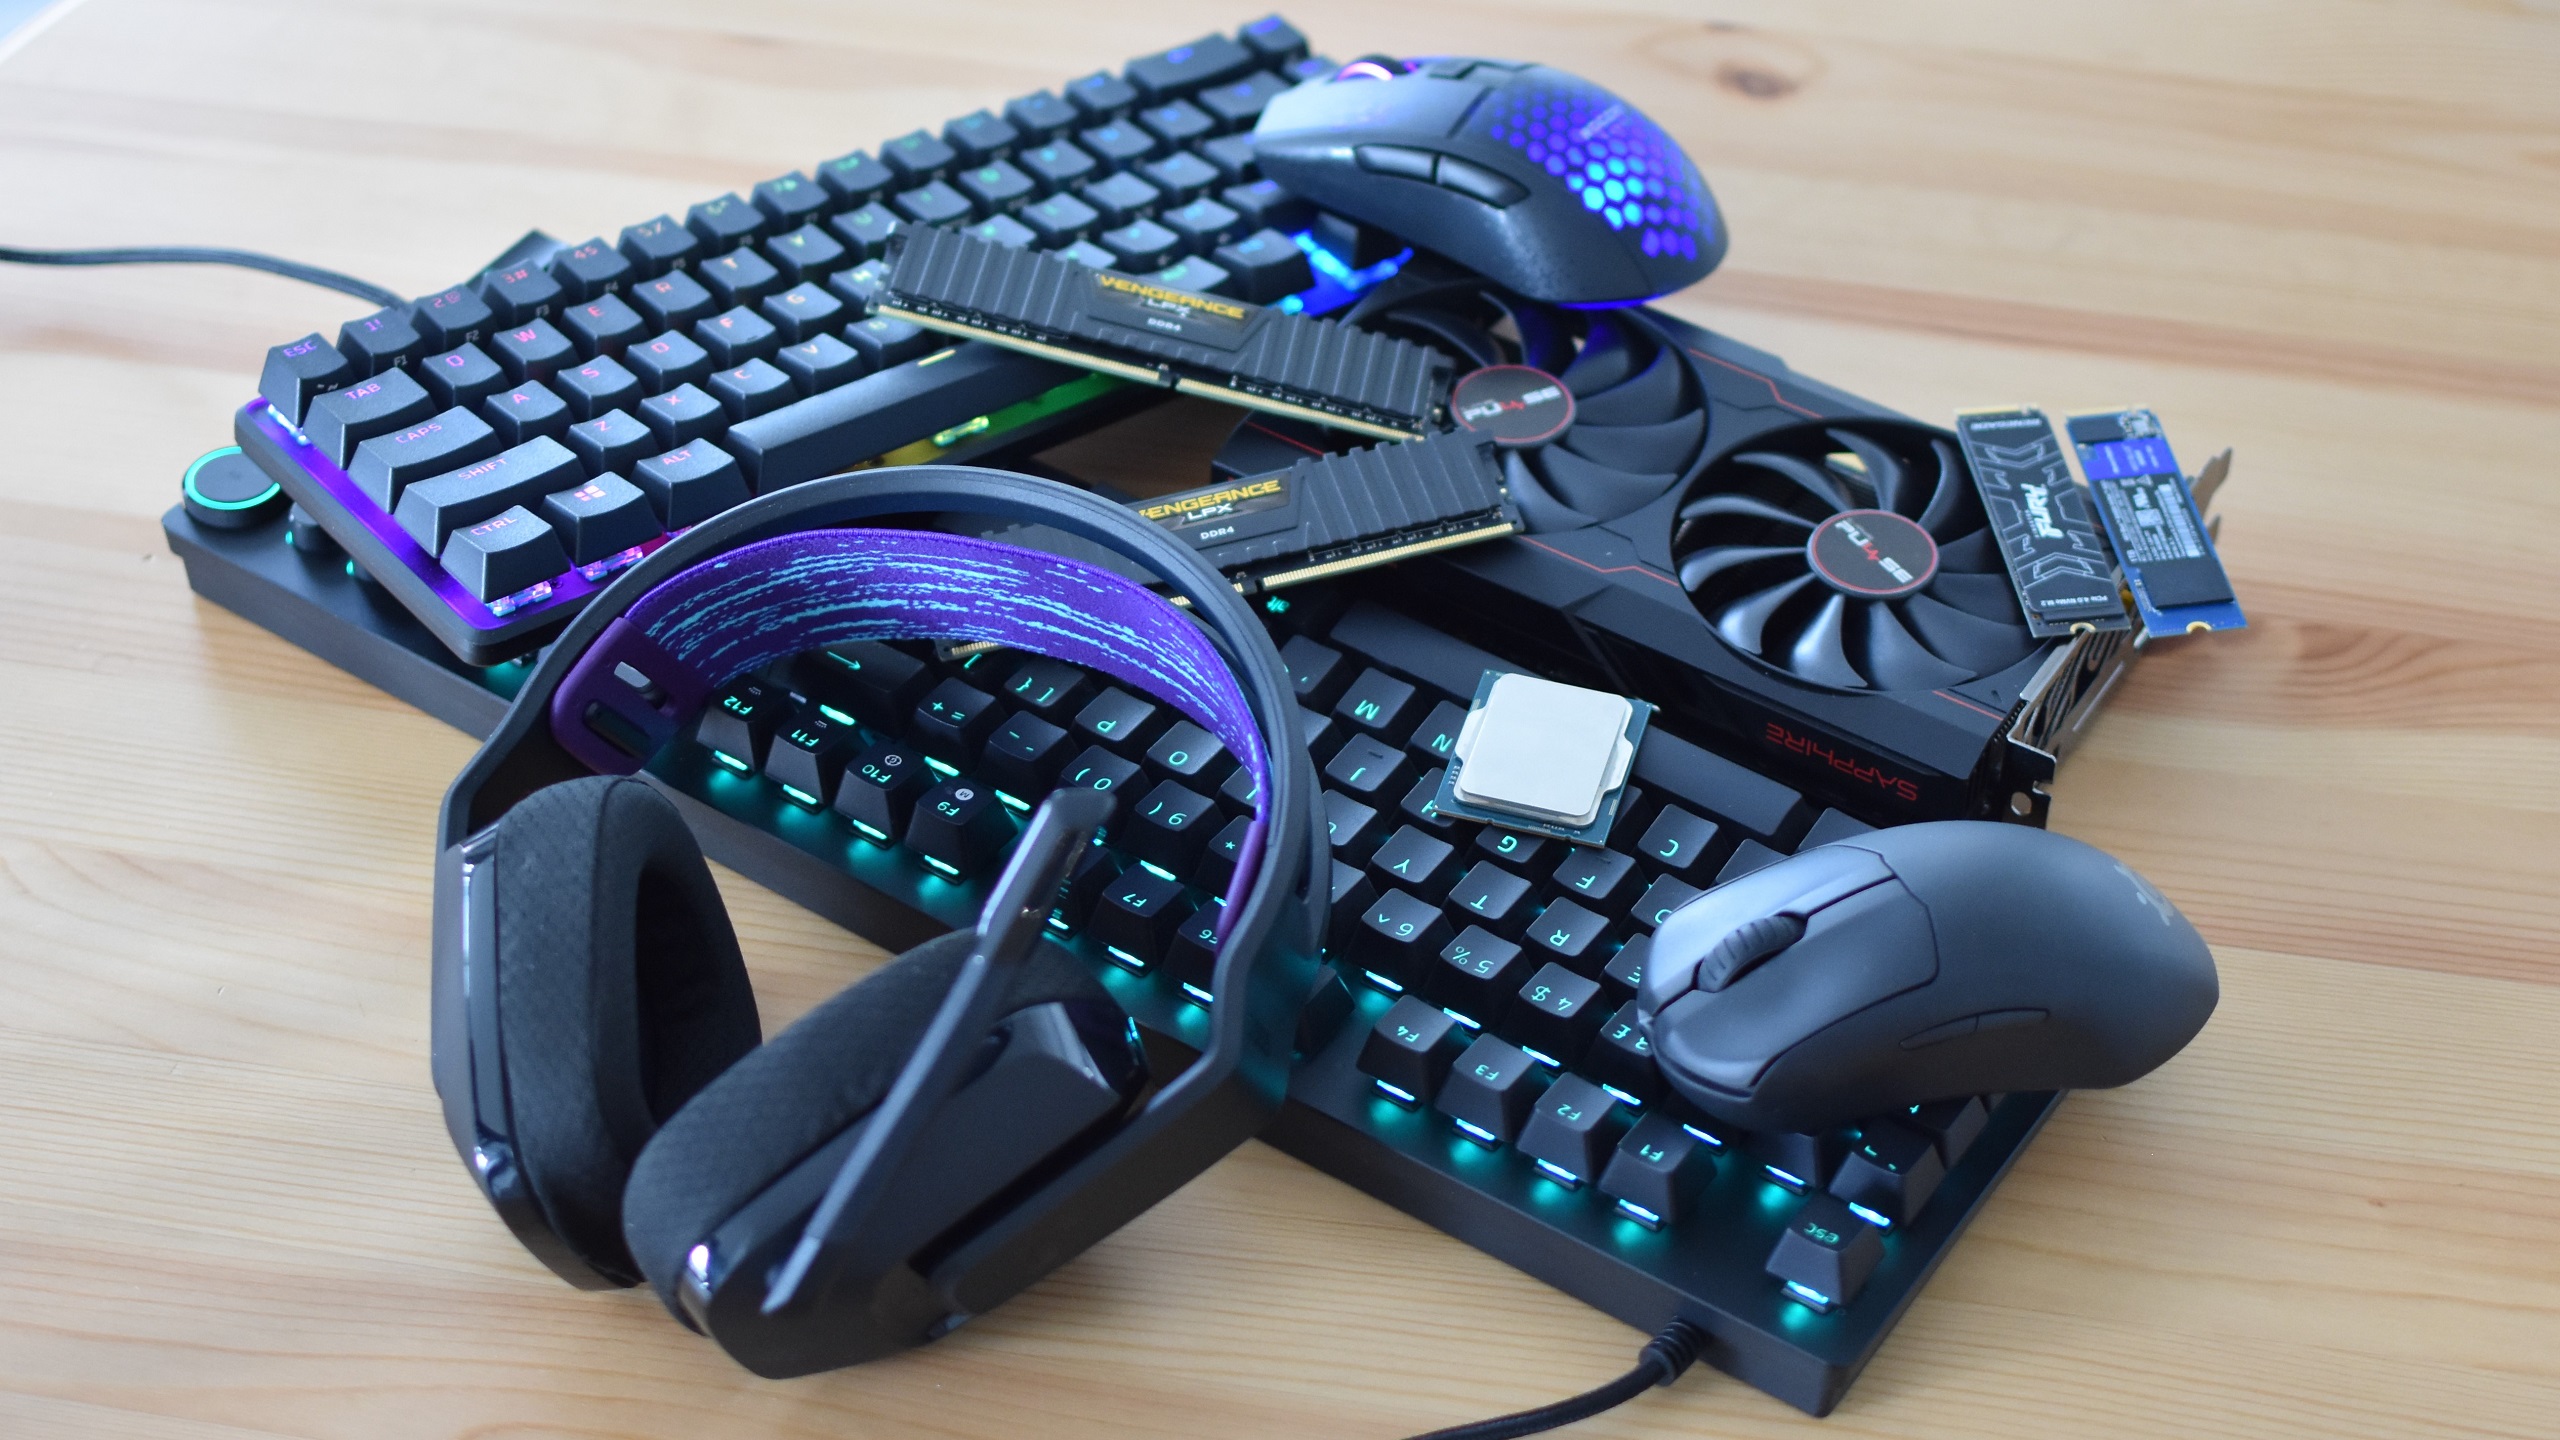 Assorted PC gaming hardware, including various keyboards, RAM sticks, SSDs and gaming mice, piled up on a table.